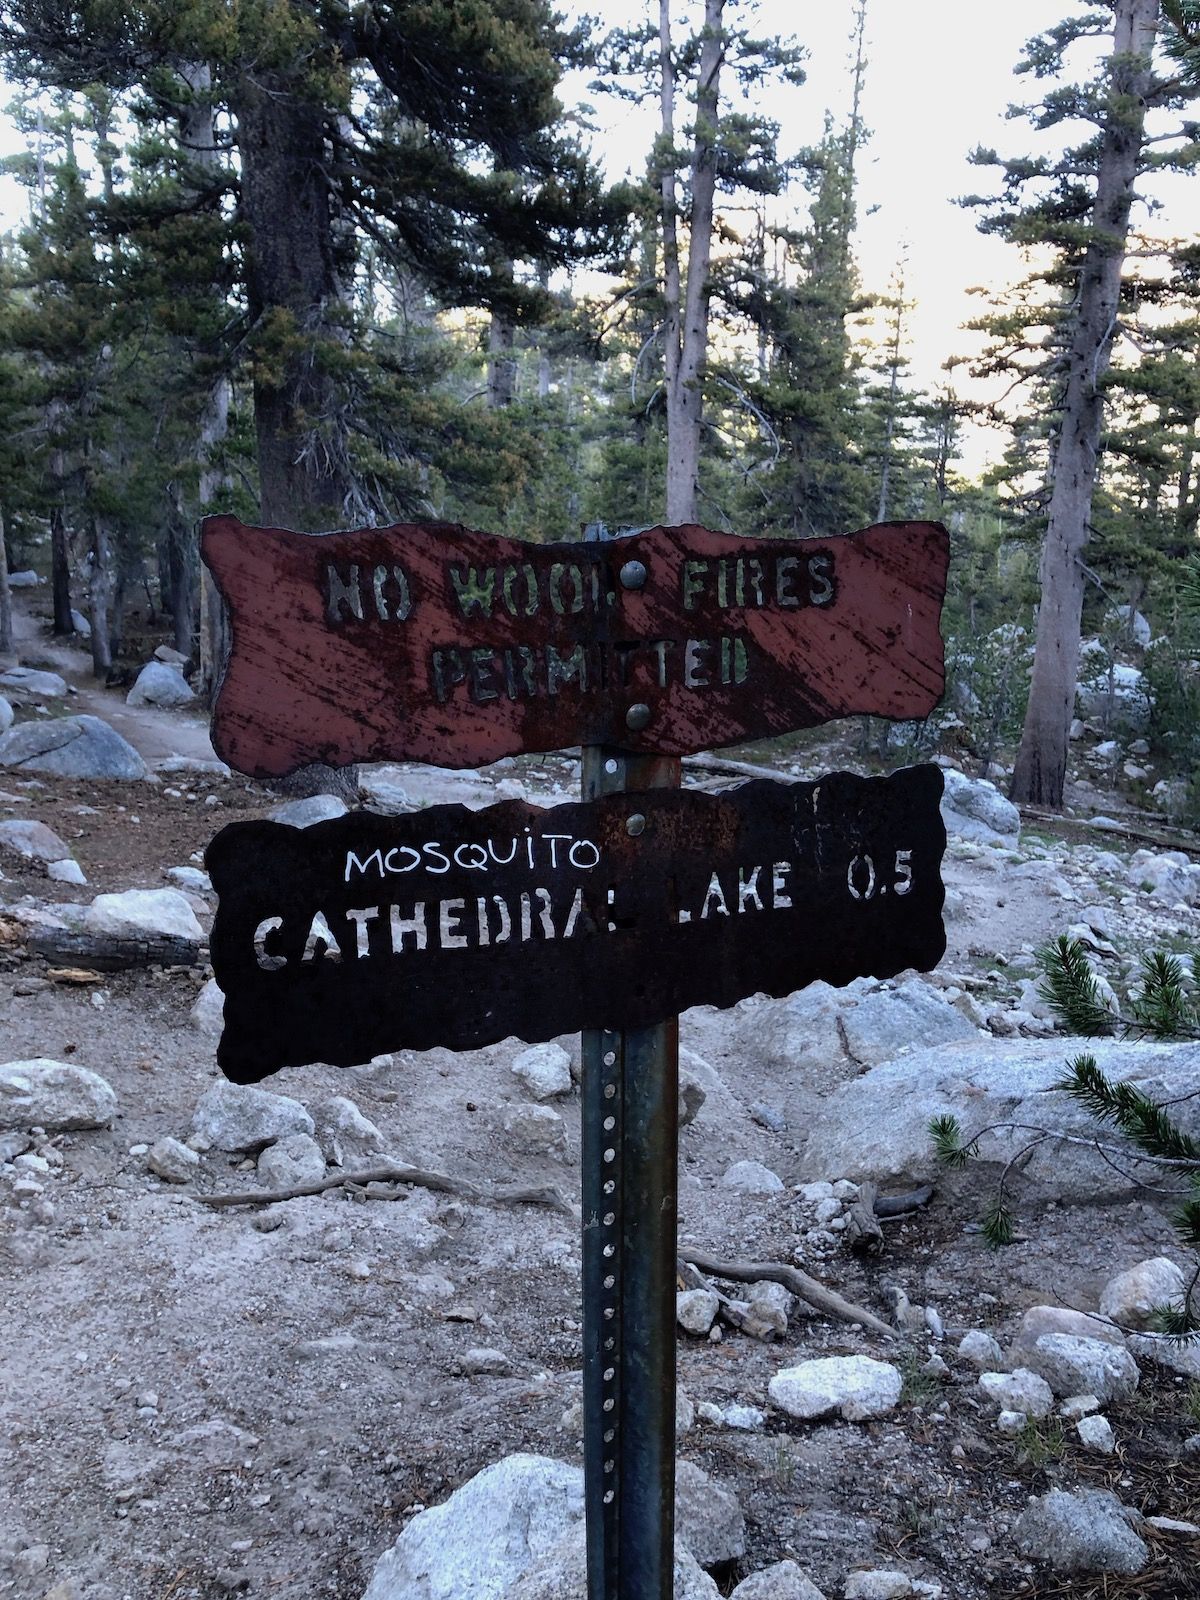 Hiker was surprised to find mosquitoes in the Sierra, proceeded to vandalize the park.